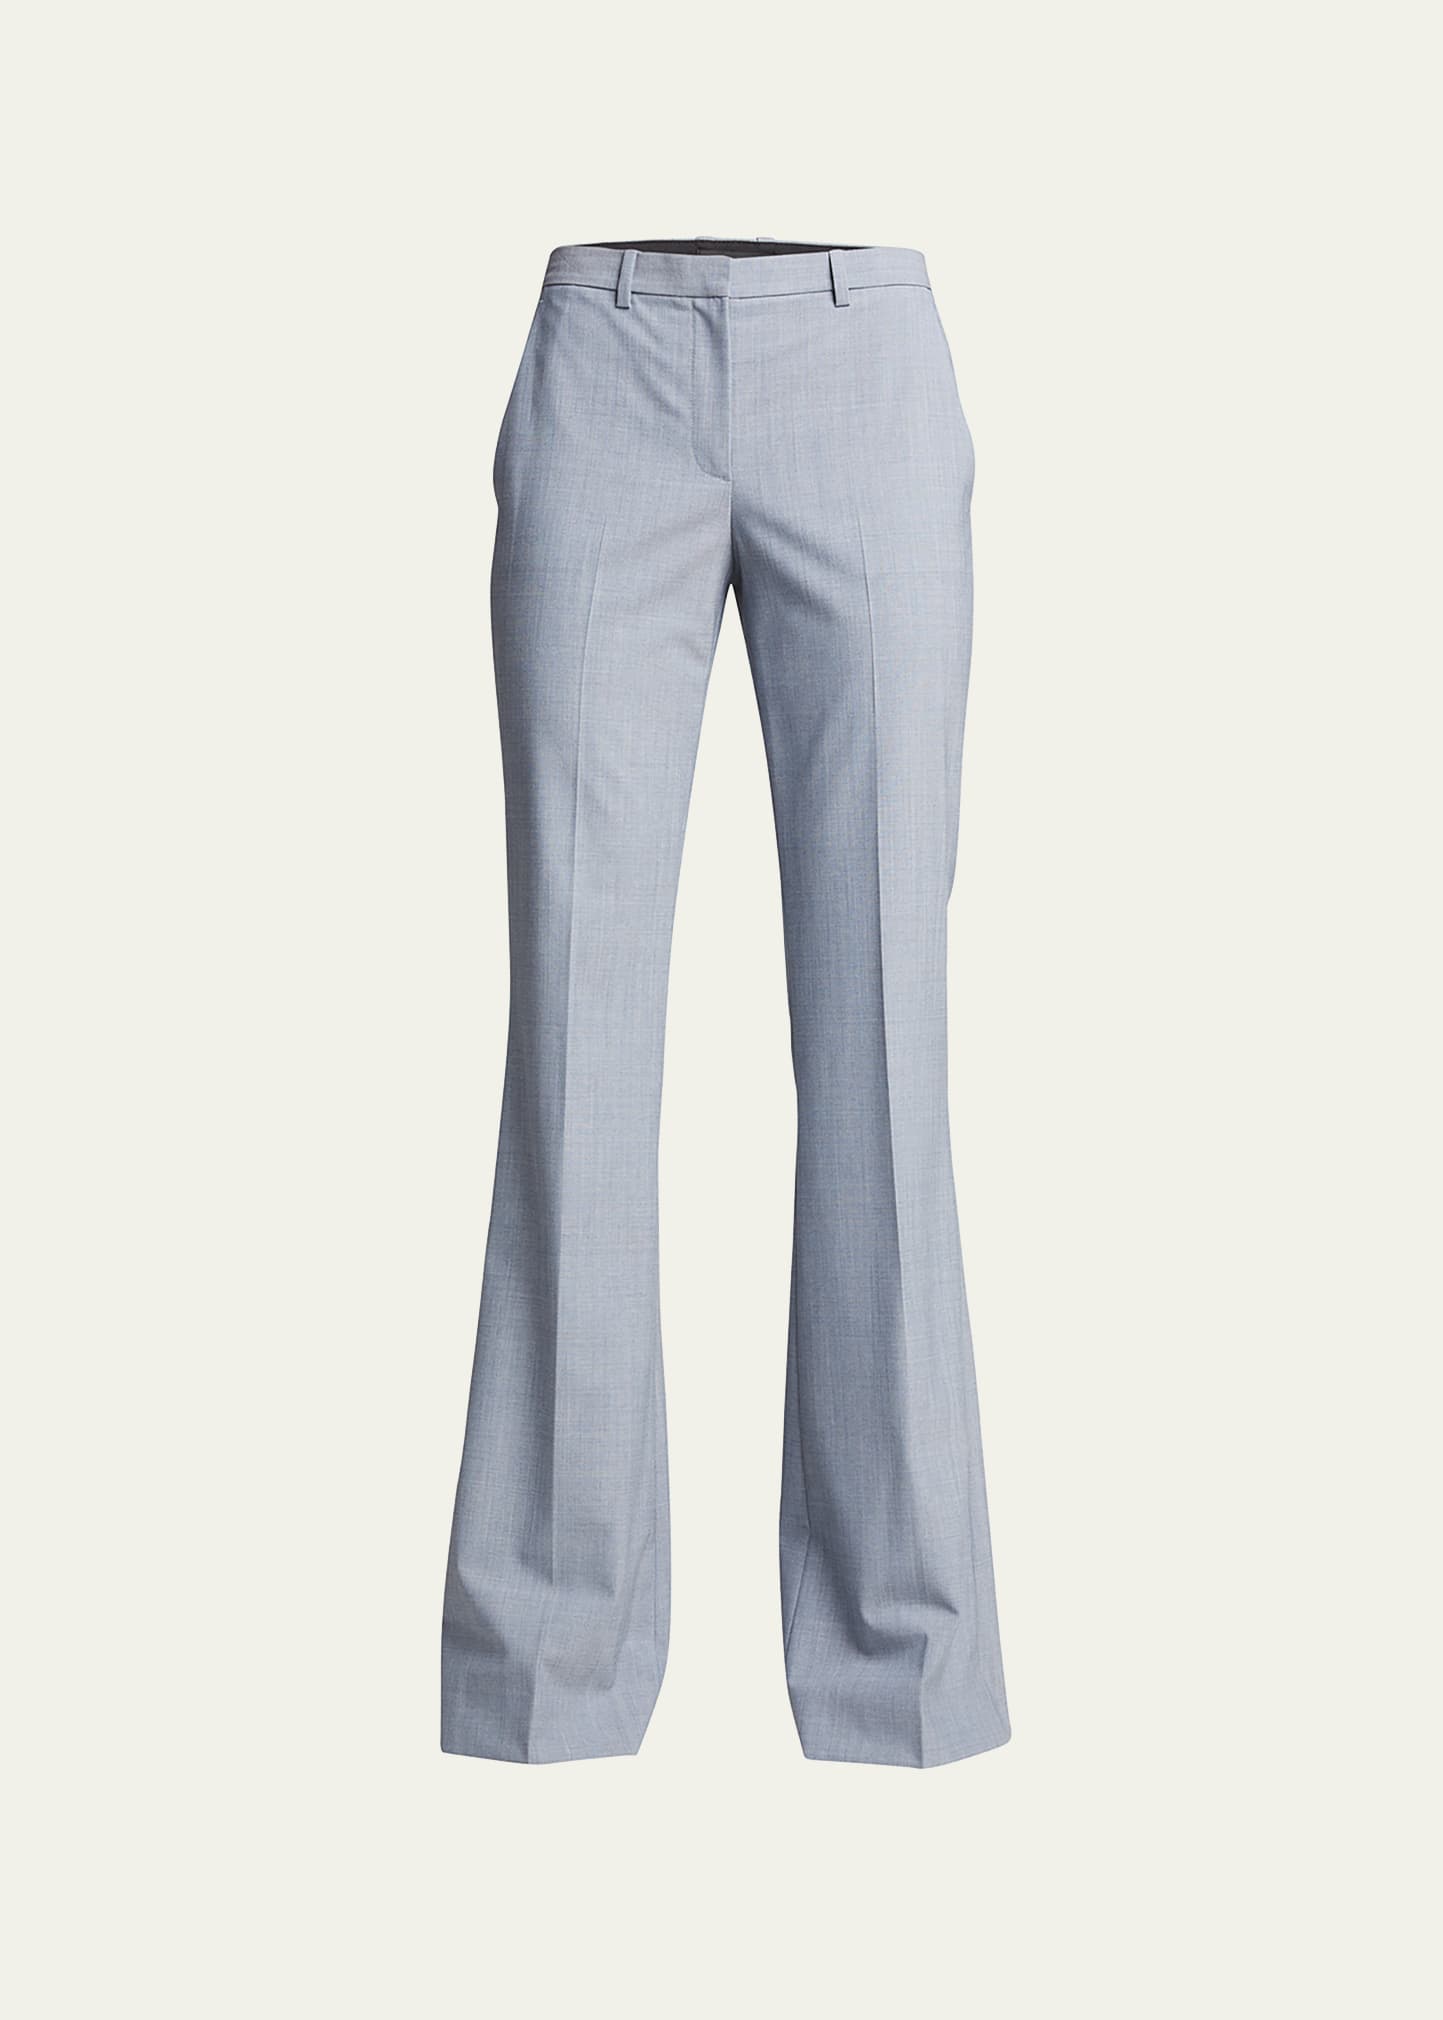 Tuesday's Workwear Report: Demitria Pant in Good Wool 